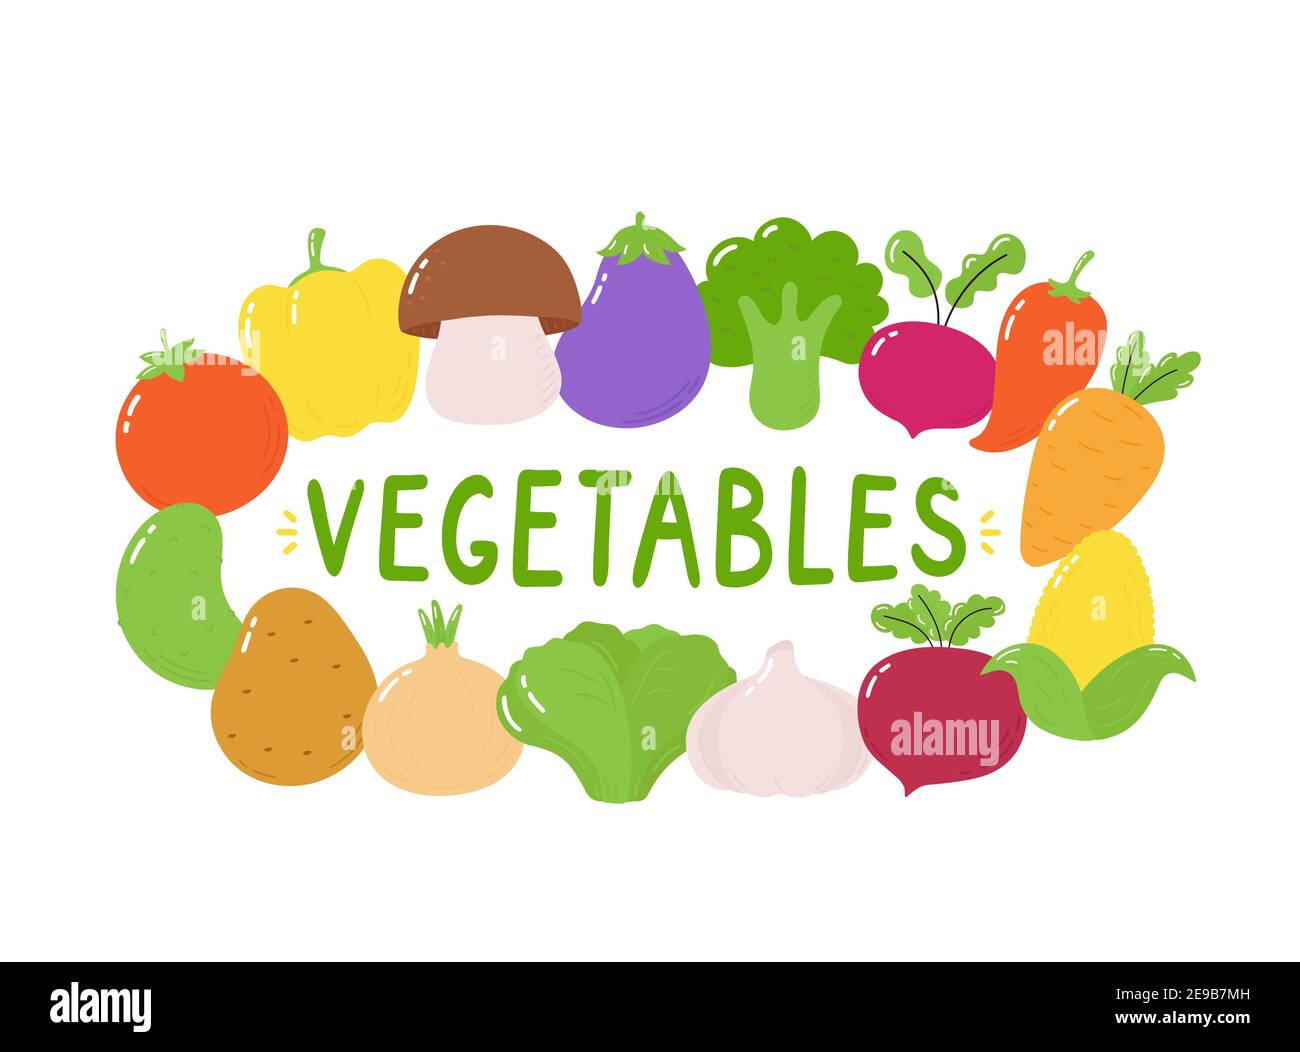 Vegetables illustration set. Isolated on white background. Vector cartoon illustration design, simple flat style. Funny vegetables banner concept Stock Vector